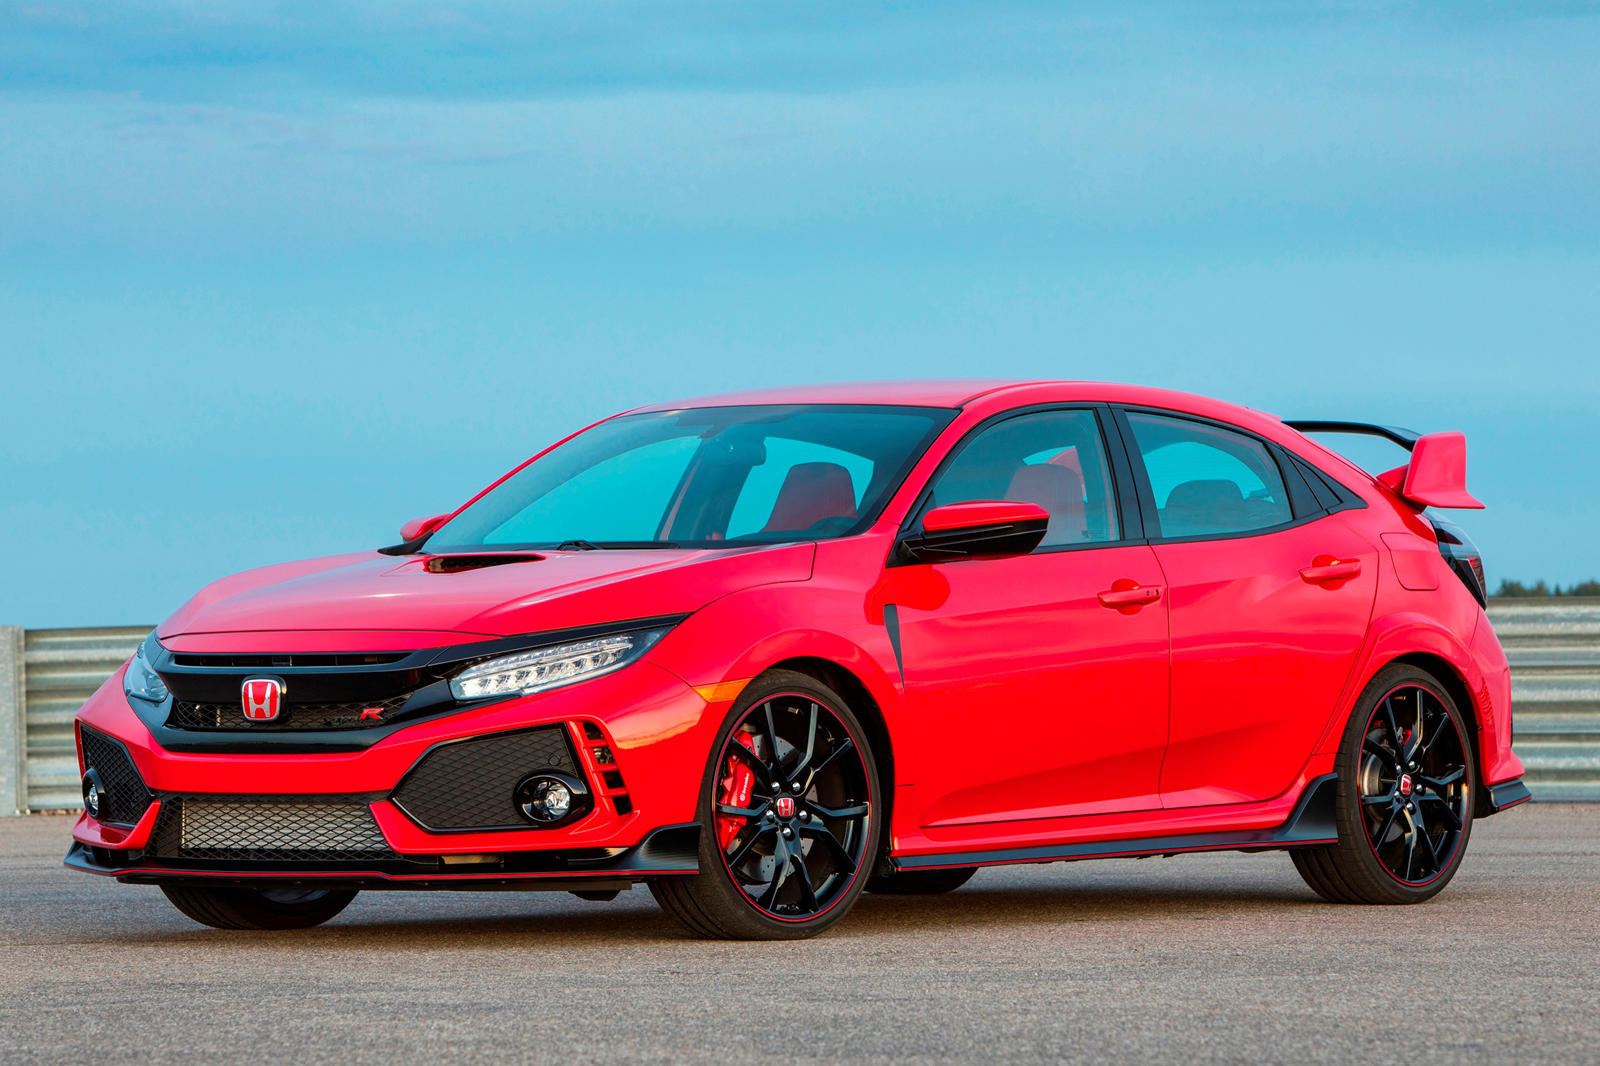 Next Generation Honda Civic Type R Could Be Made In